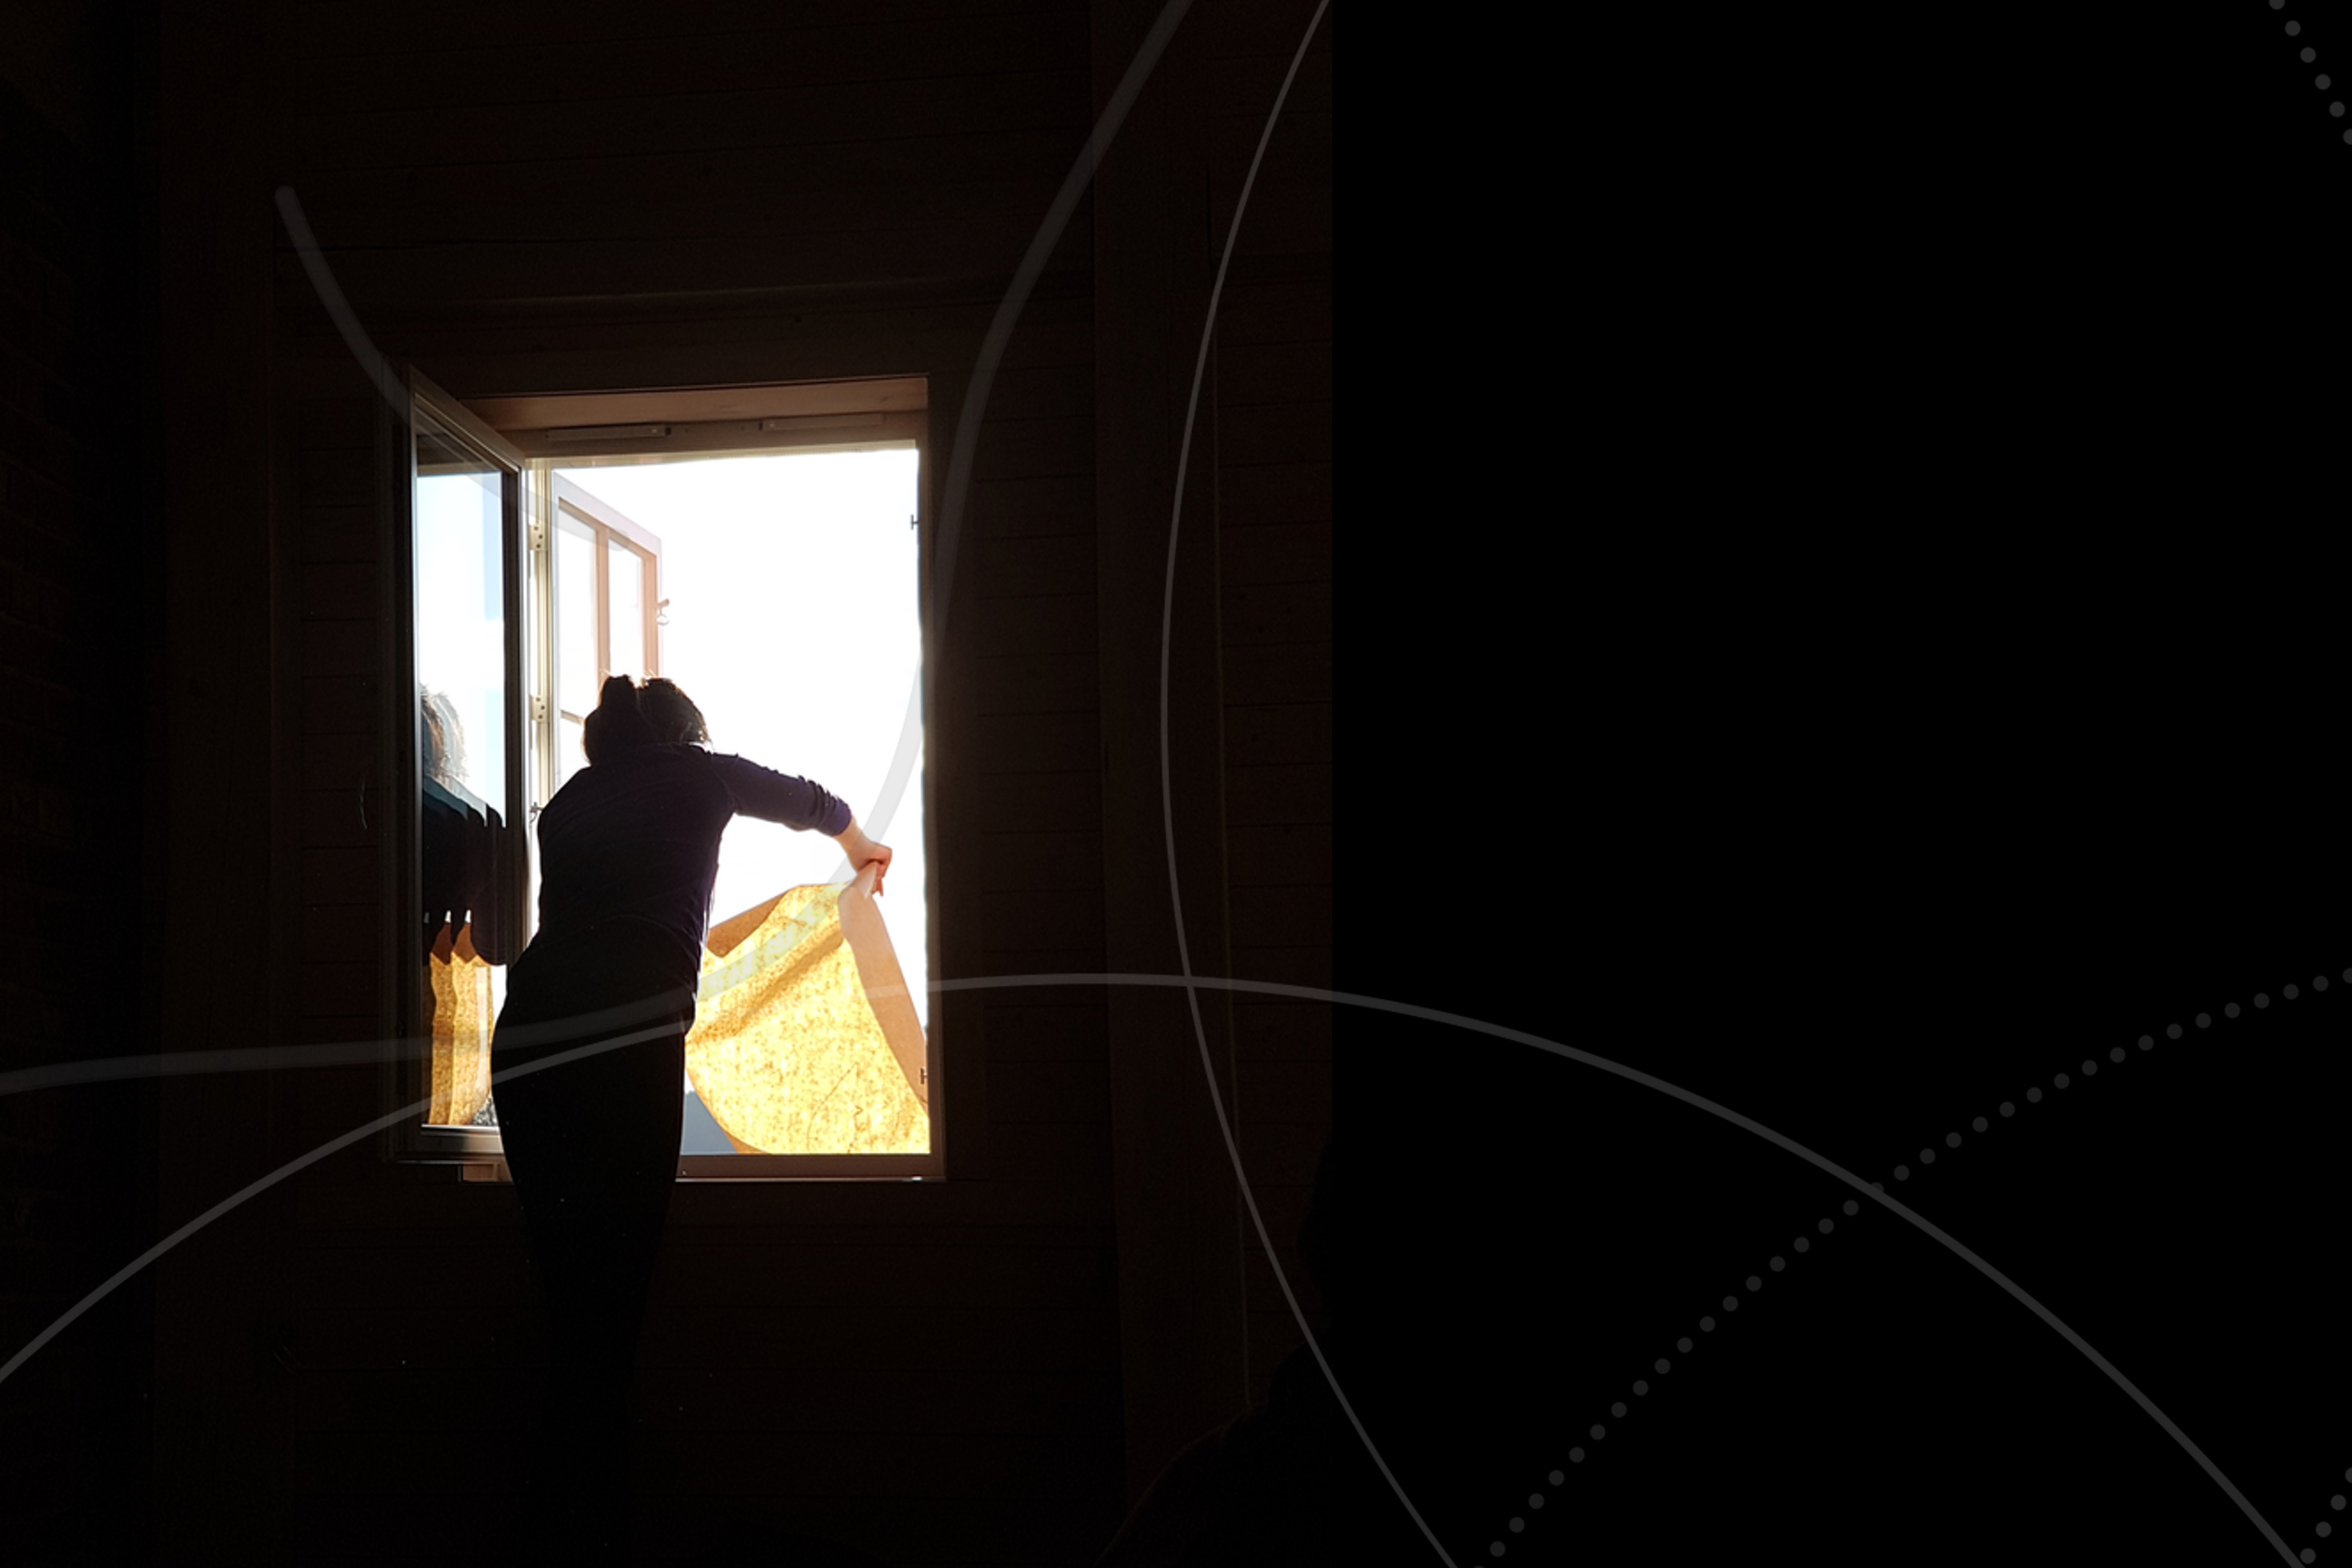 A woman in a darkened room, viewed from behind, shakes a cloth out of a window open to bright sunlight.